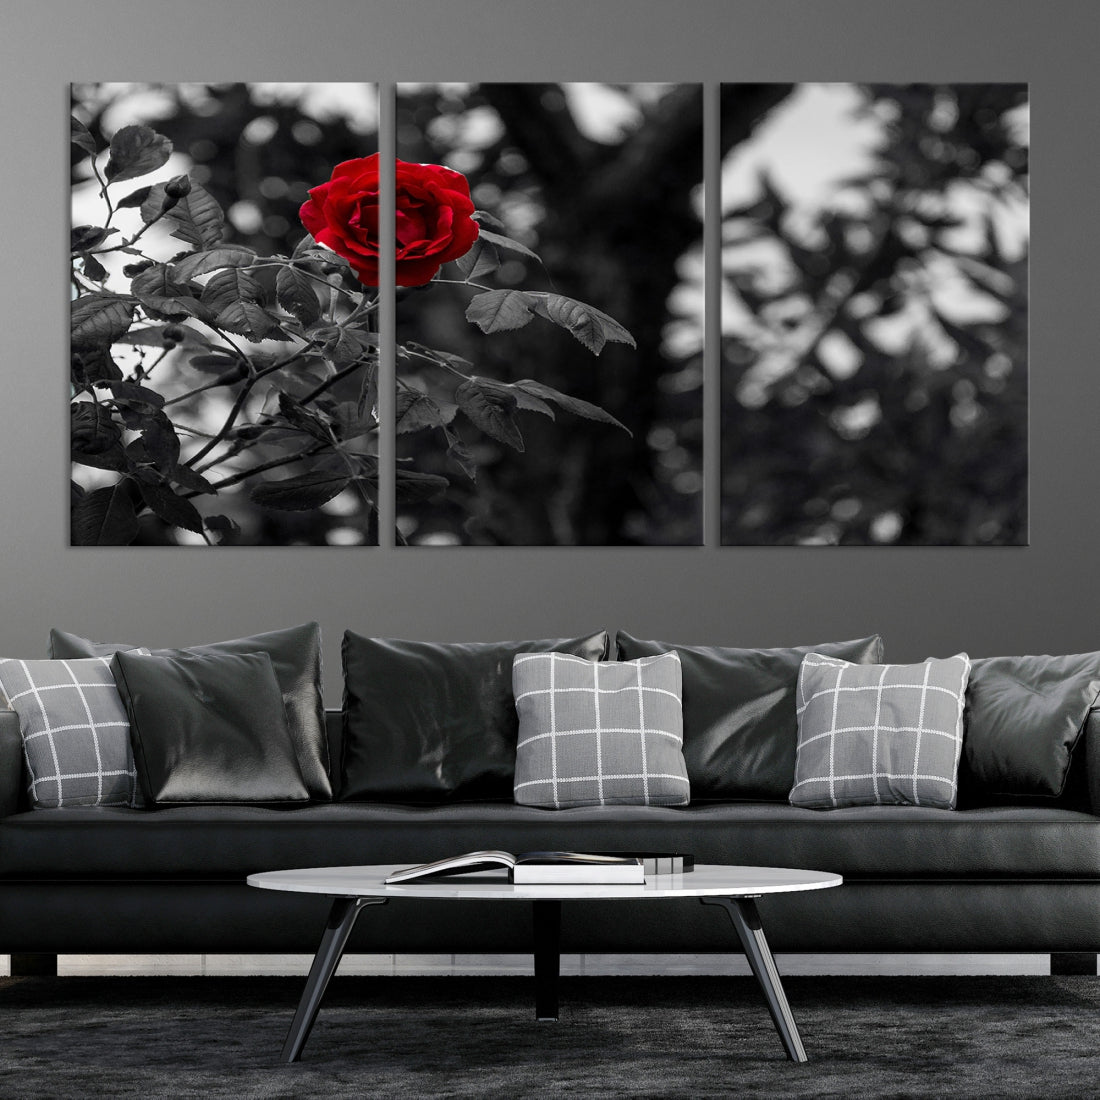 Red Rose with Black & White Background Love Canvas Wall Art Print Rose Canvas Art Love Artwork